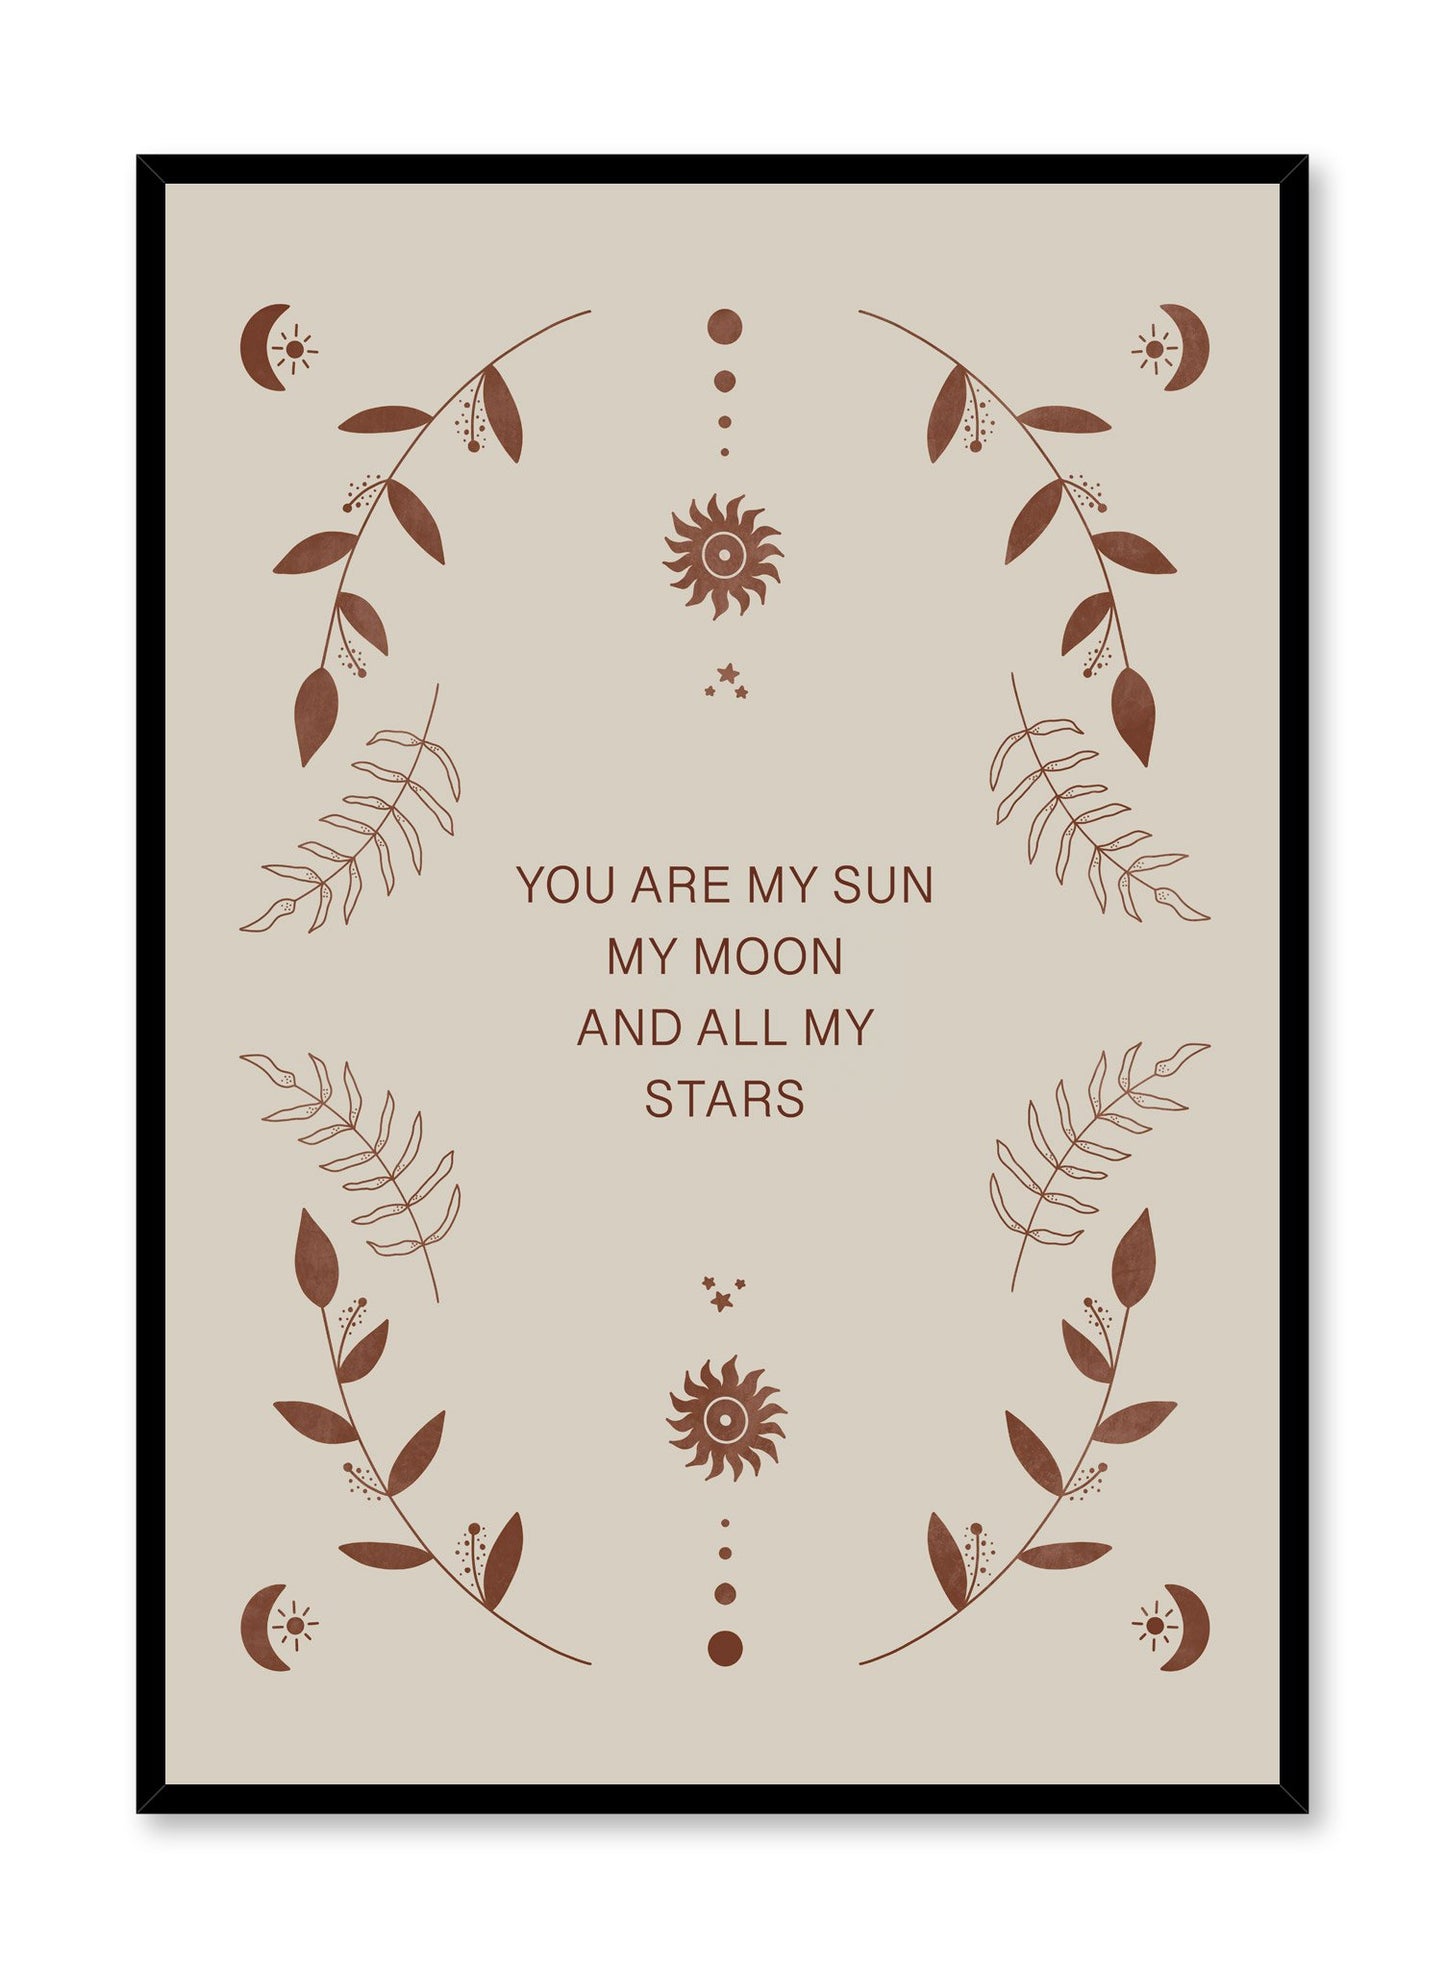 Celestial typography poster by Opposite Wall with Celestial Love quote